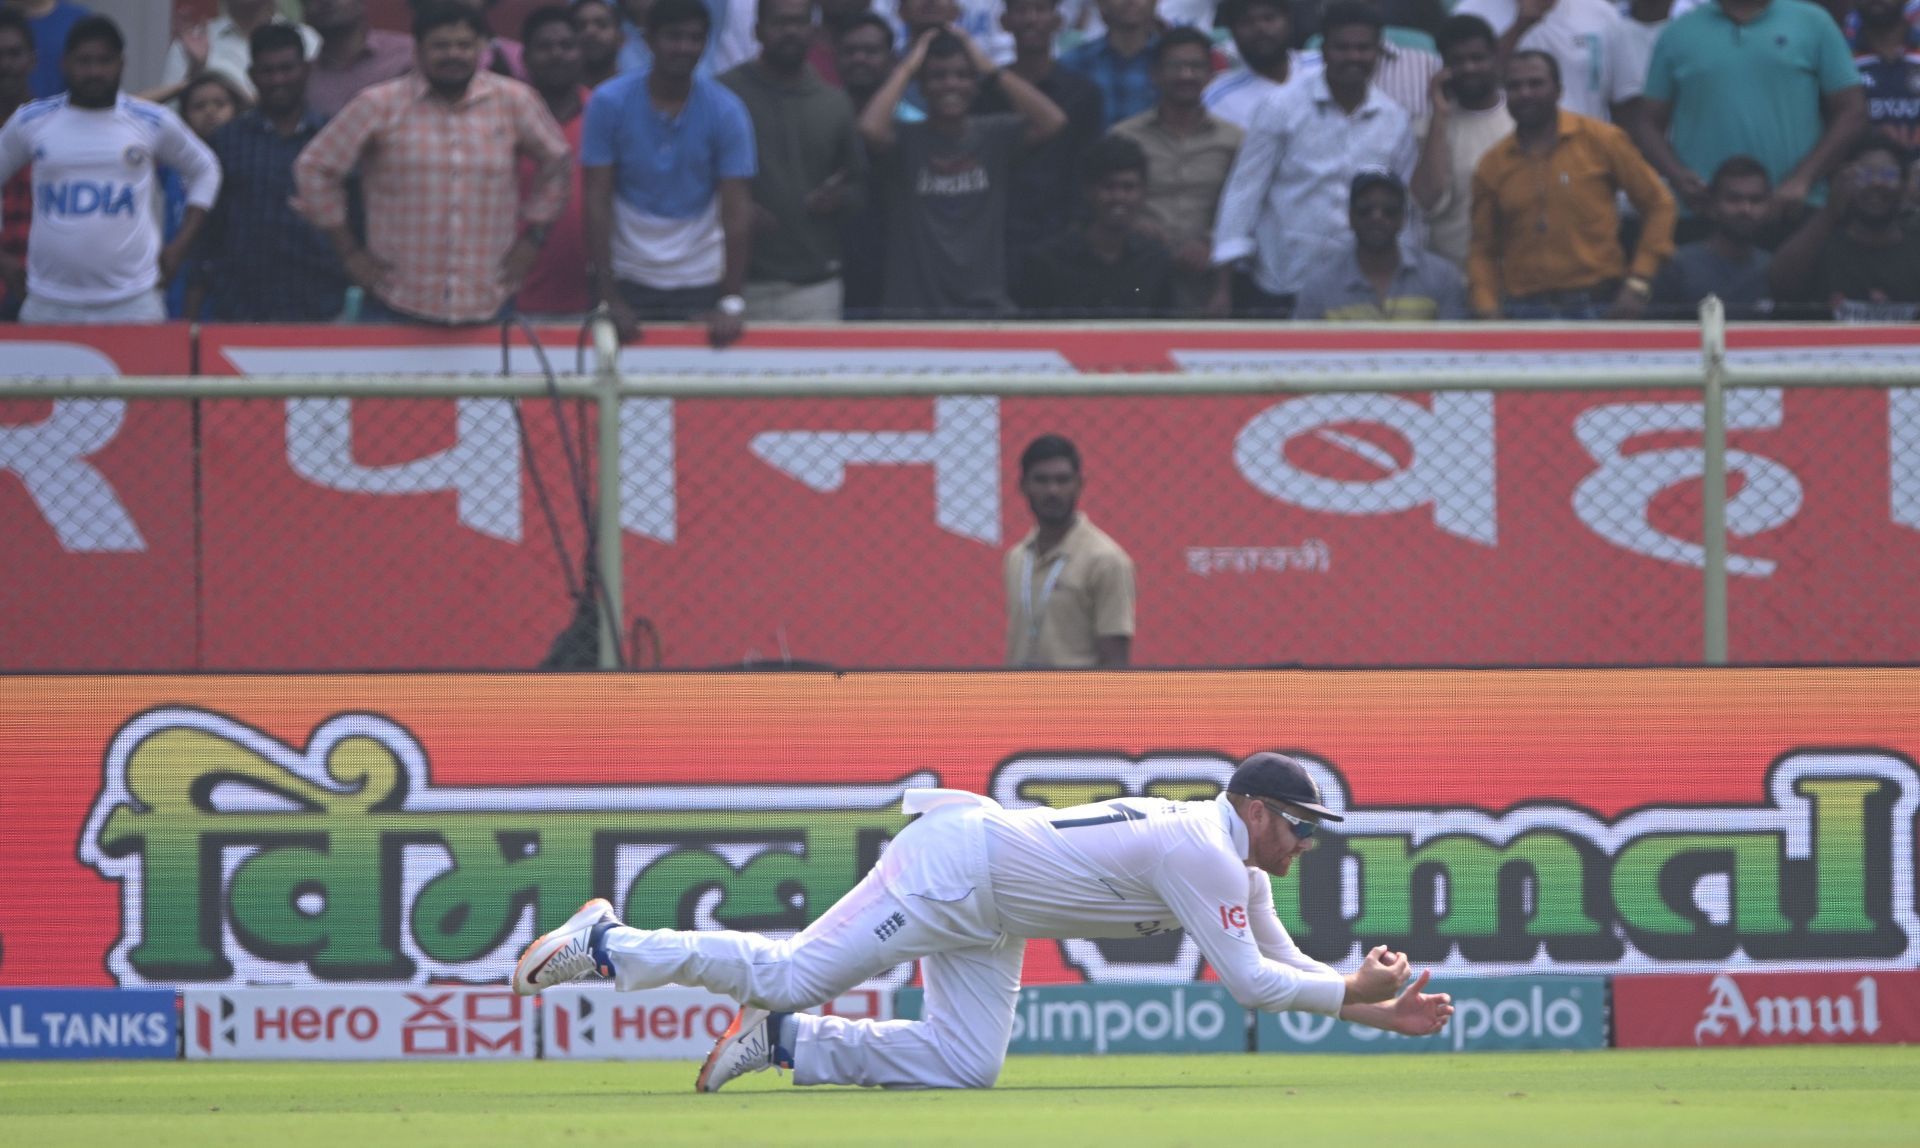 The visitors have dropped a few crucial catches in the series. (Pic: Getty Images)